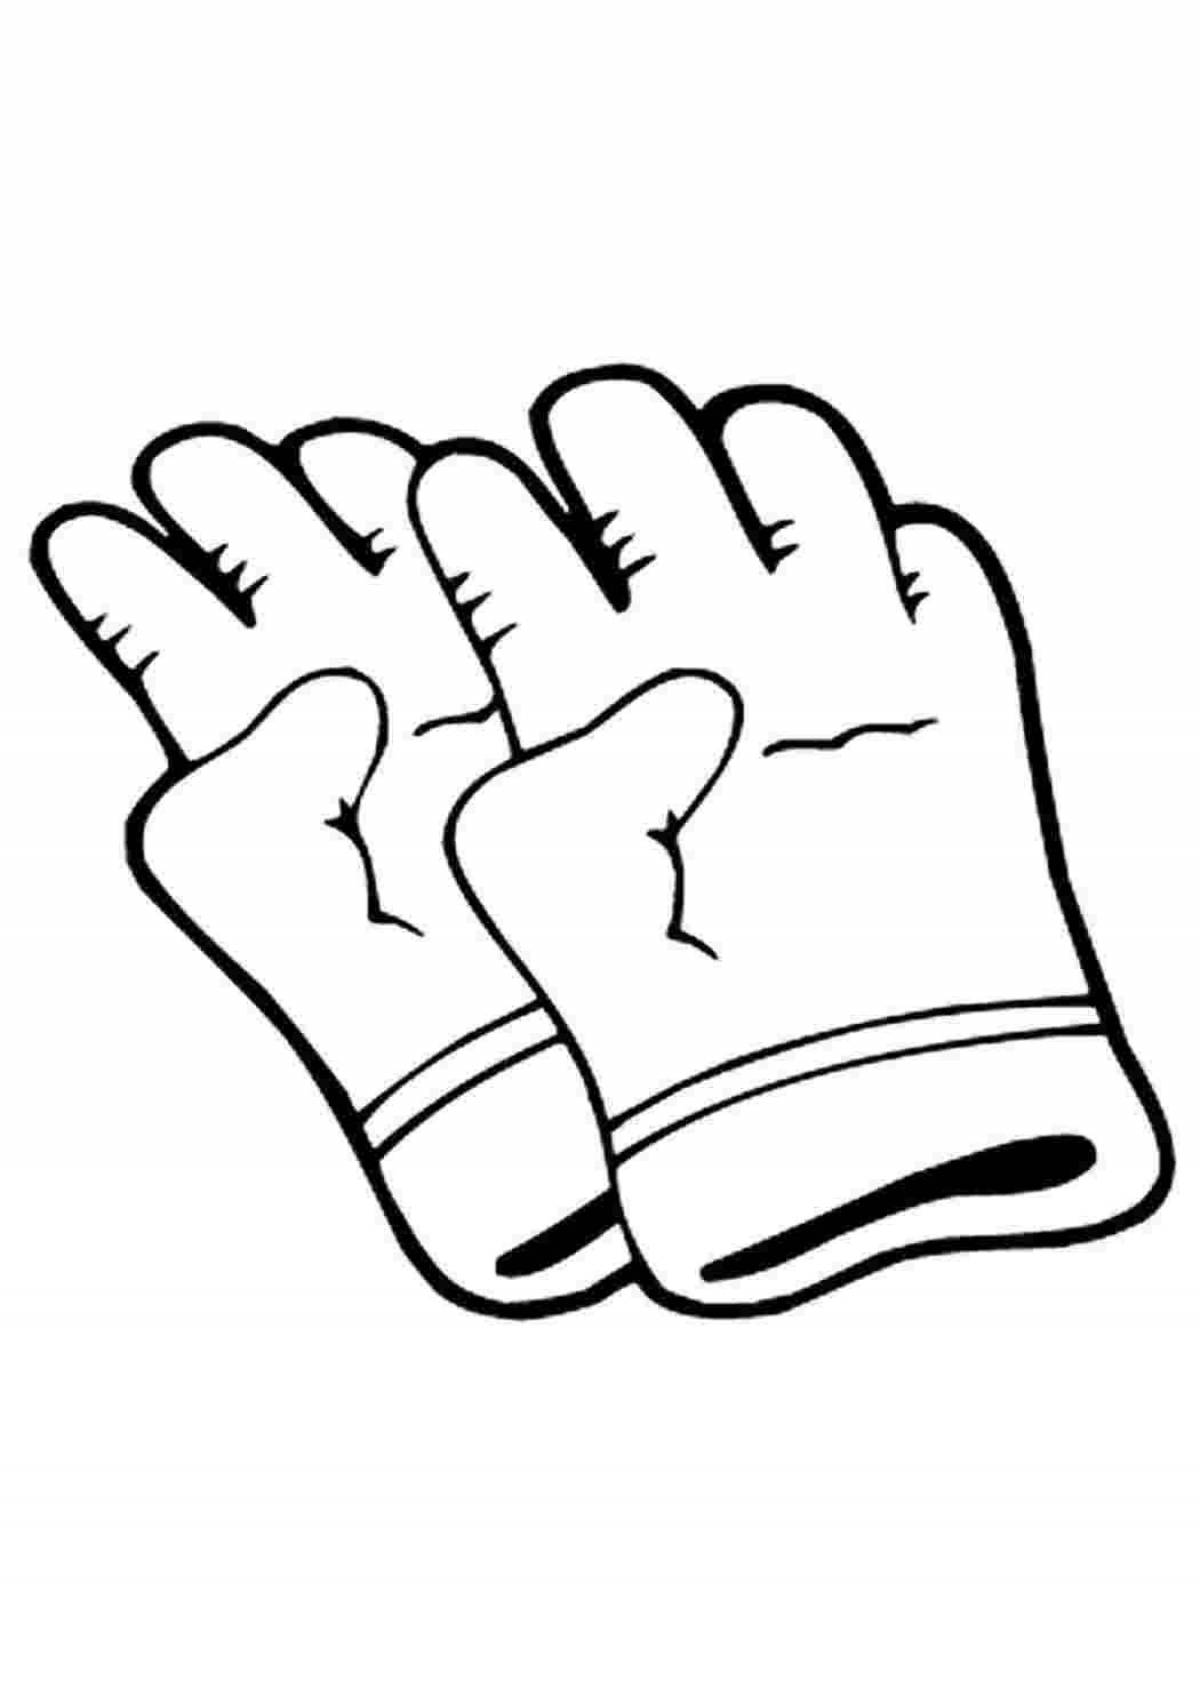 Fabulous gloves coloring book for kids